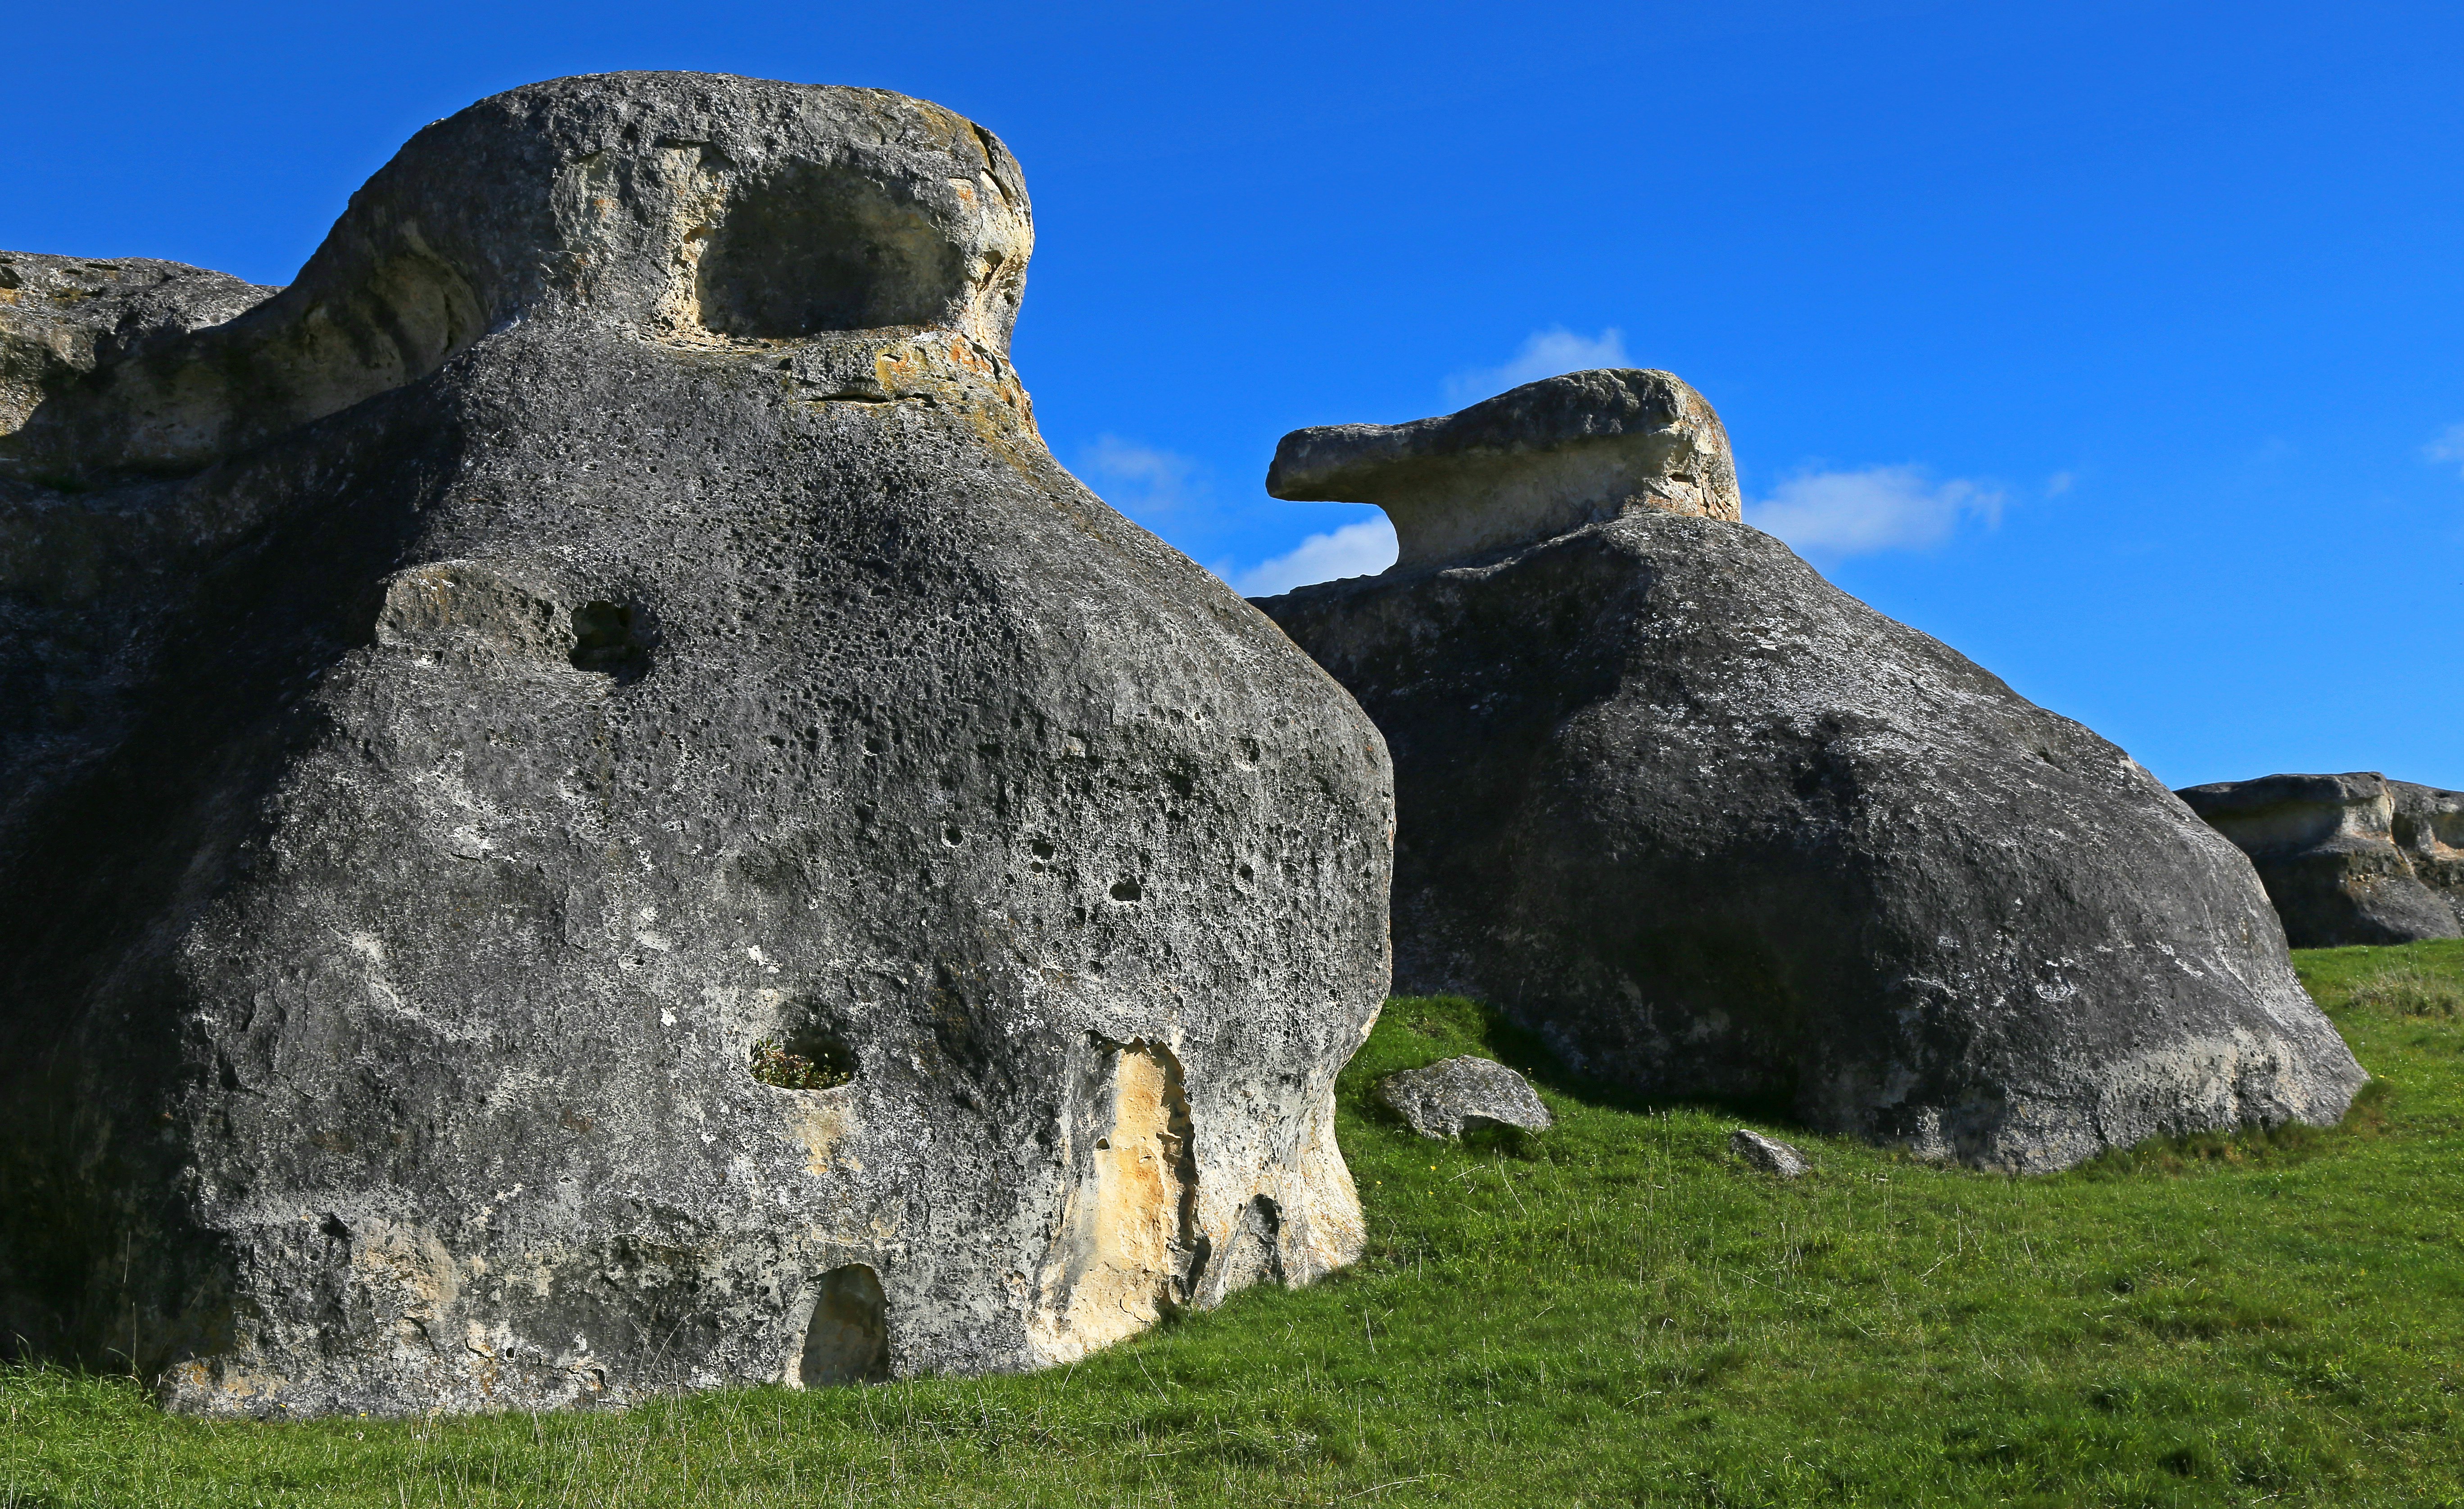 gray rock formation on green grass field under blue sky during daytime